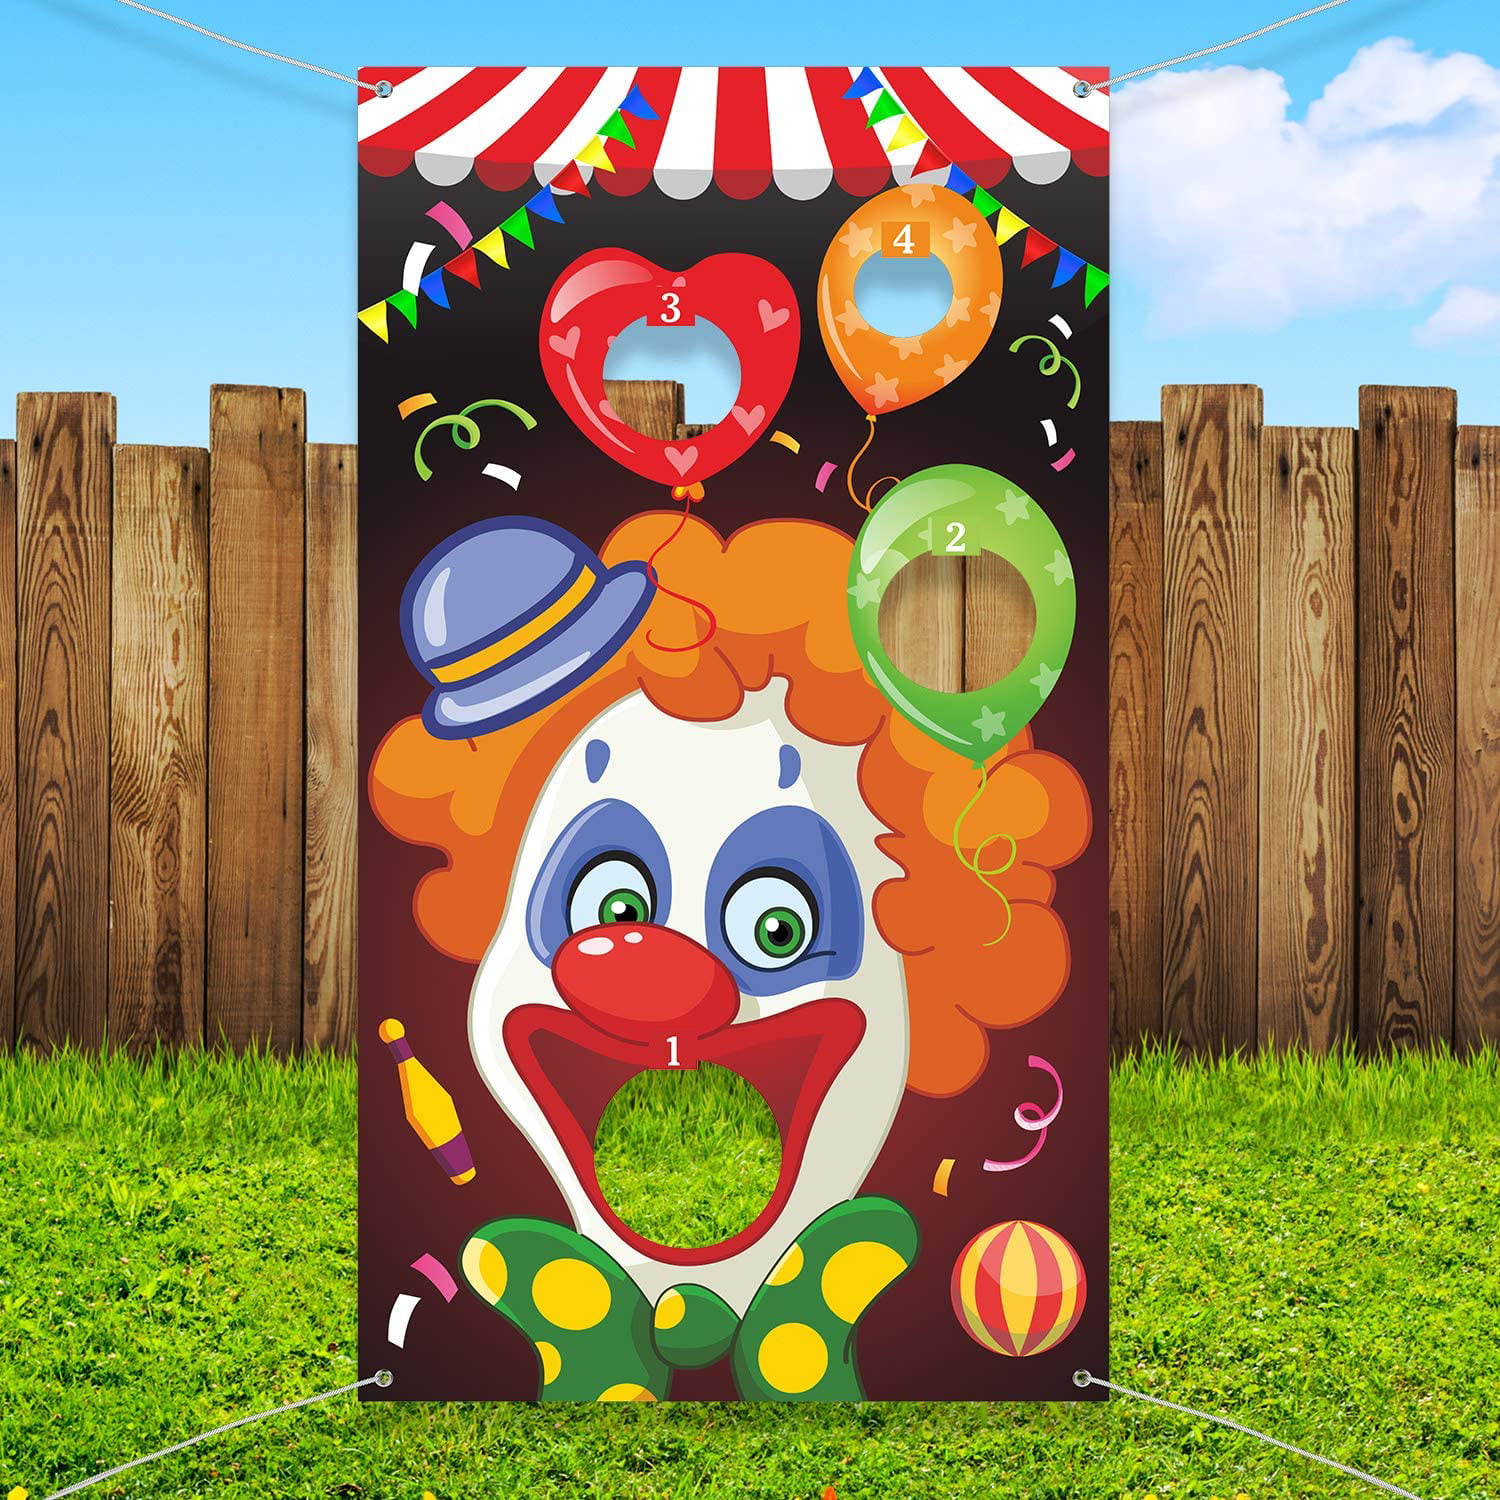 Bean Bag Toss Game for Kids Adults Turkey Themed Party Supplies Decorations for Outdoor Thanksgiving Carnival Birthday Tossing Activity Toys with 3 Bean Bags 